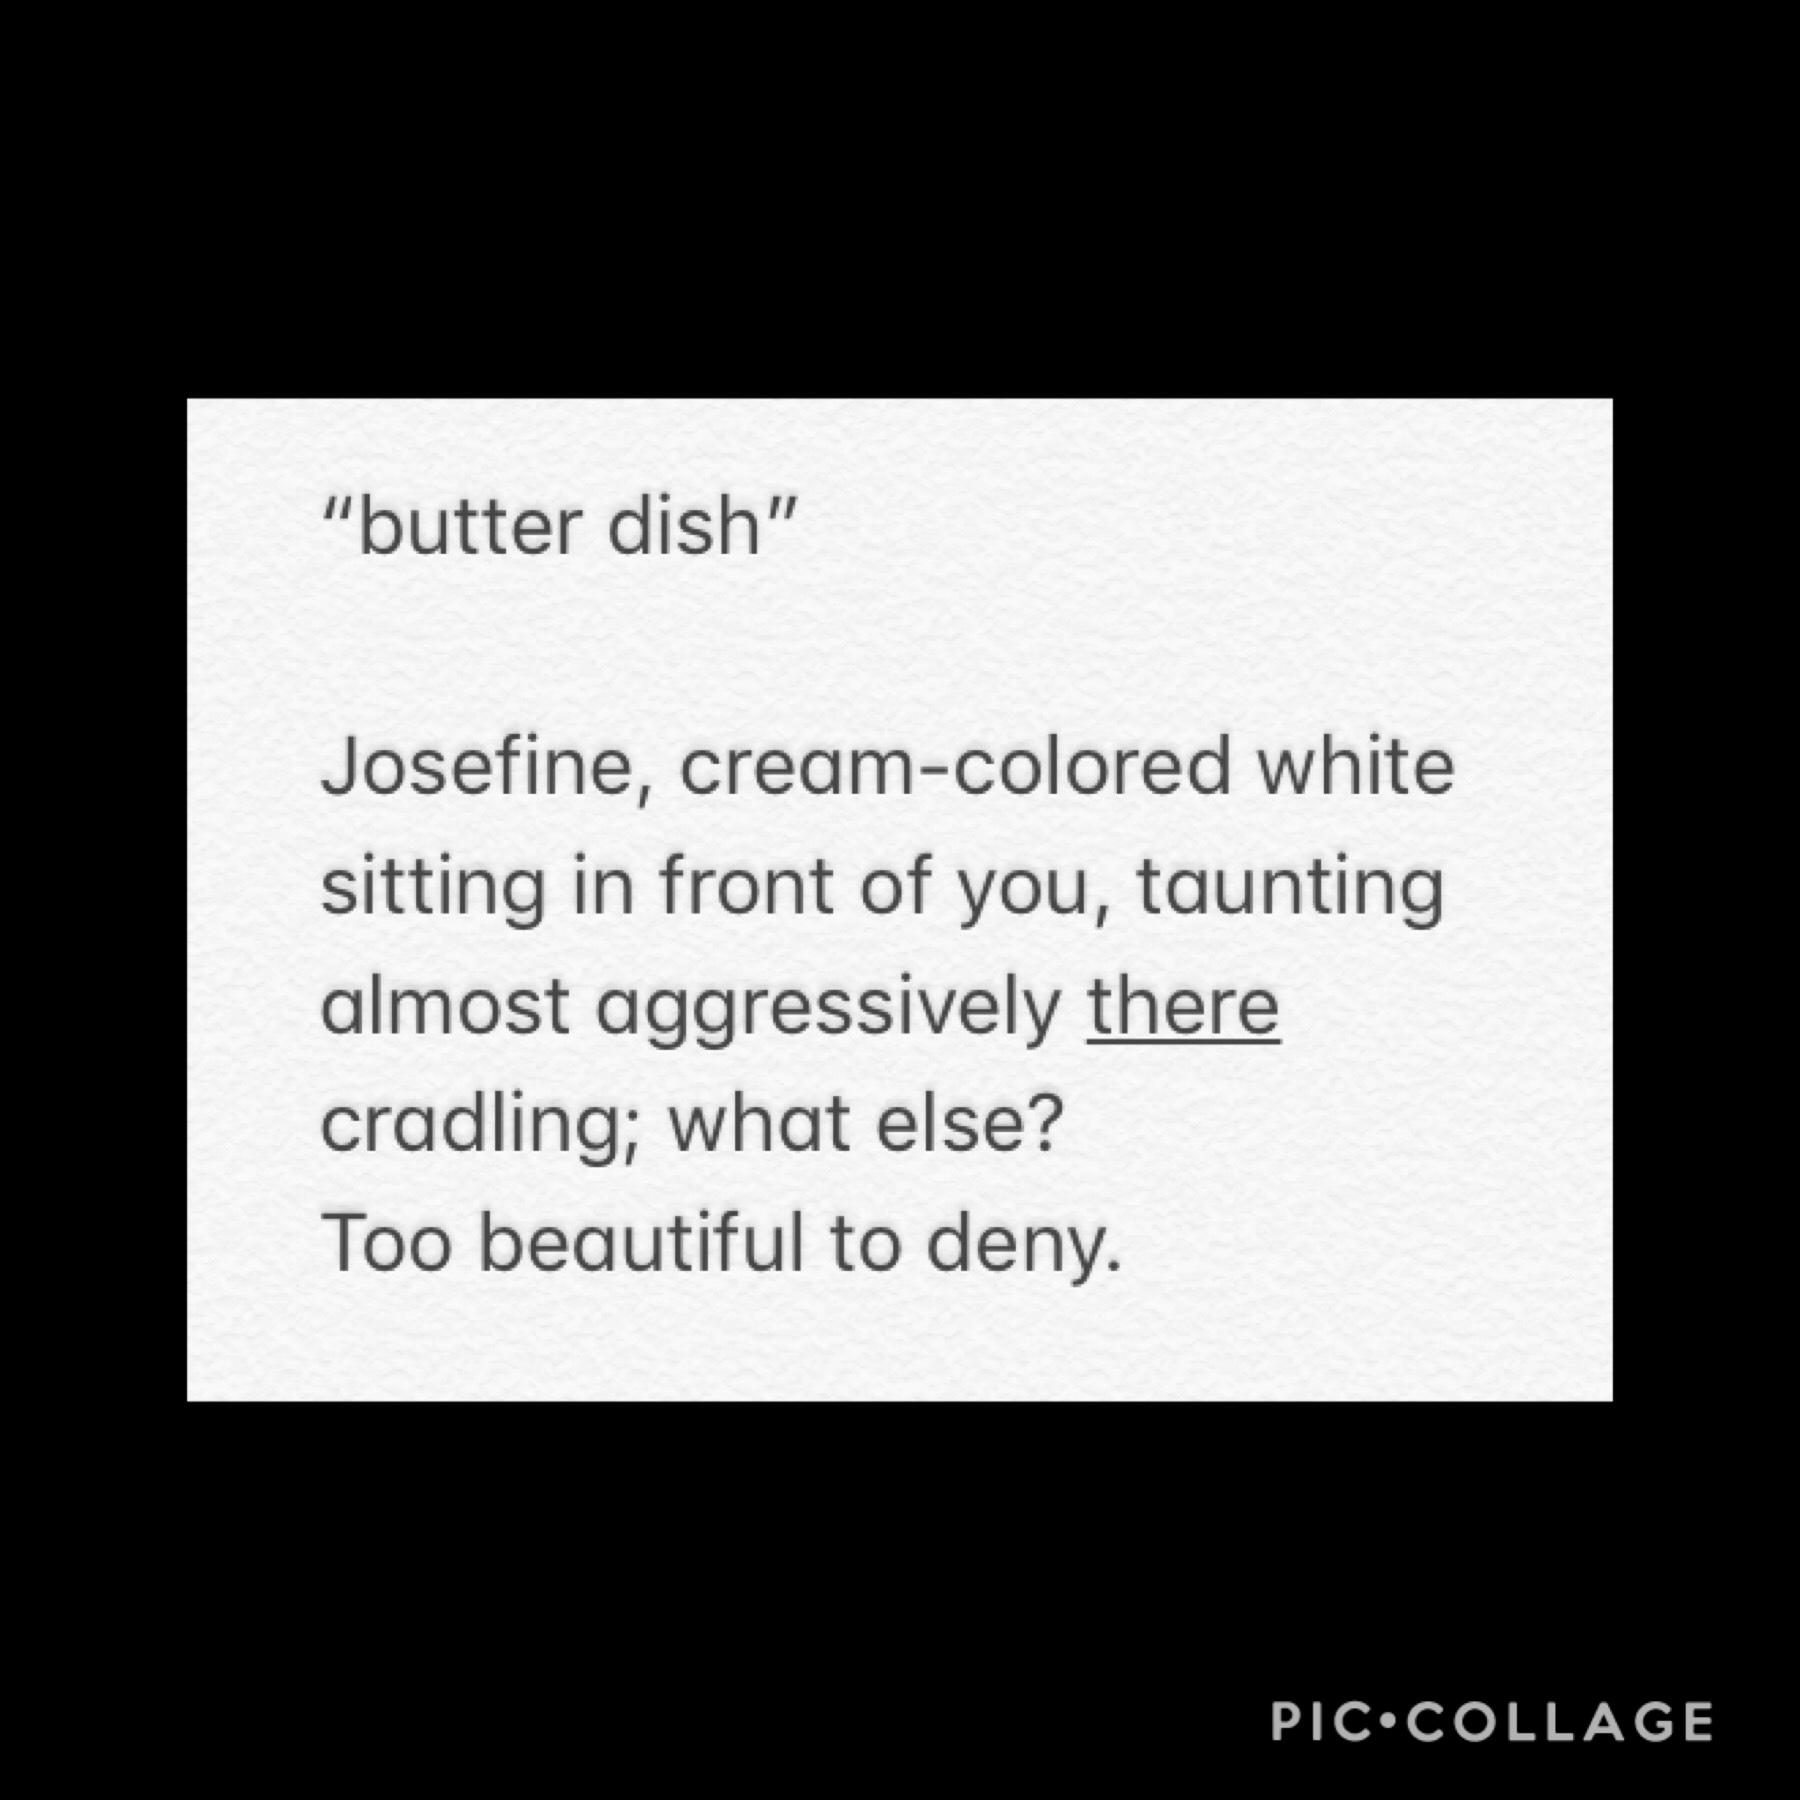 i wrote this in my english class, it’s about a butter dish but the catch is that I’M the butter dish and it’s all a metaphor😍